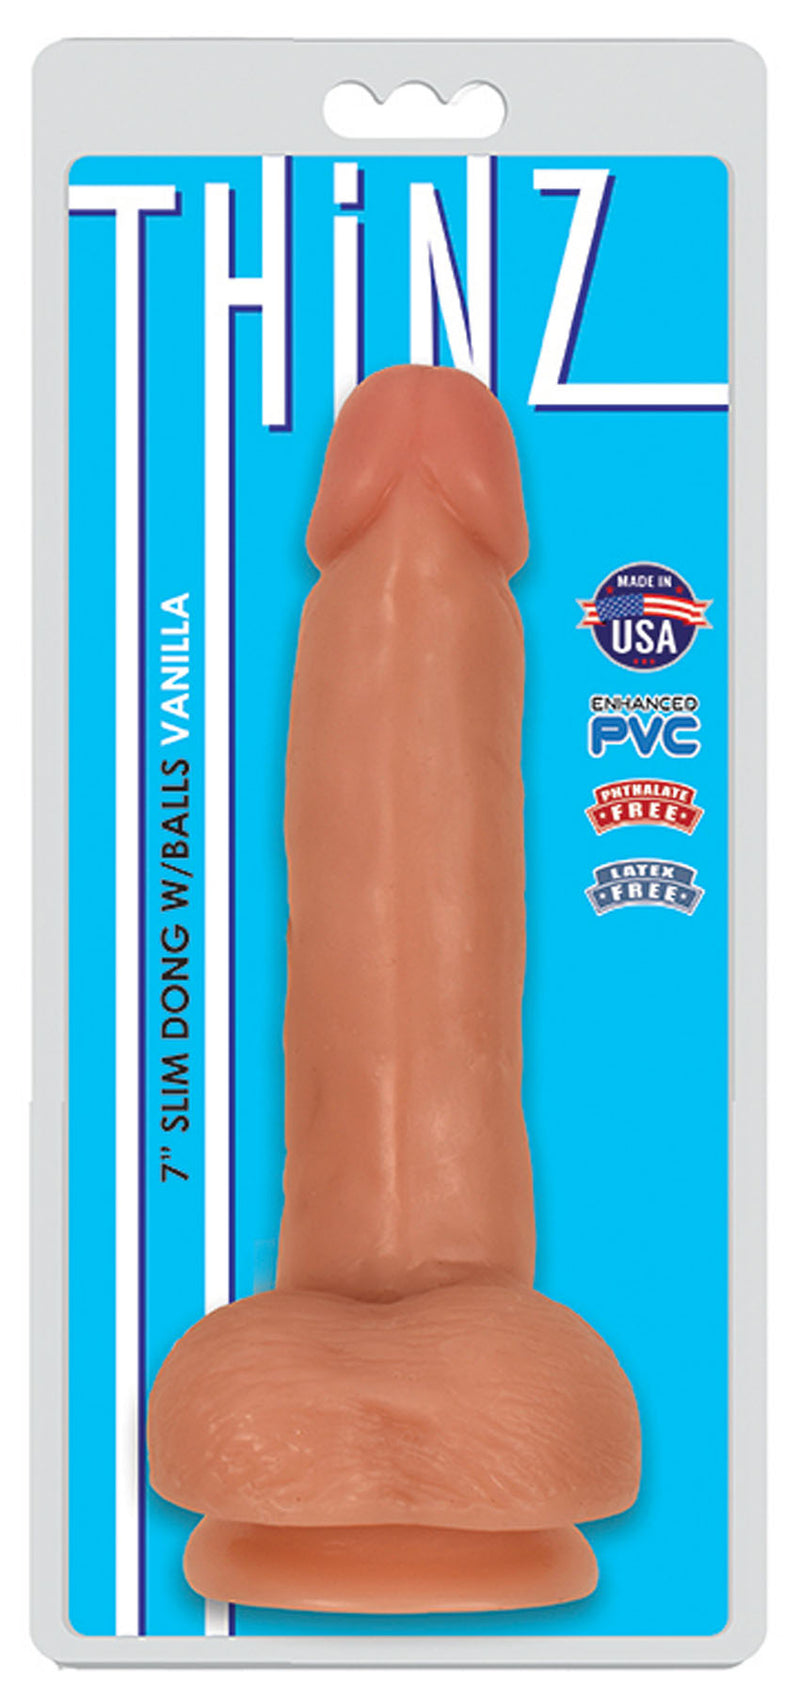 Ultra-Realistic 6" Slim Dong with Harness-Compatible Suction Cup for Maximum Pleasure and Comfort - Made in the USA!